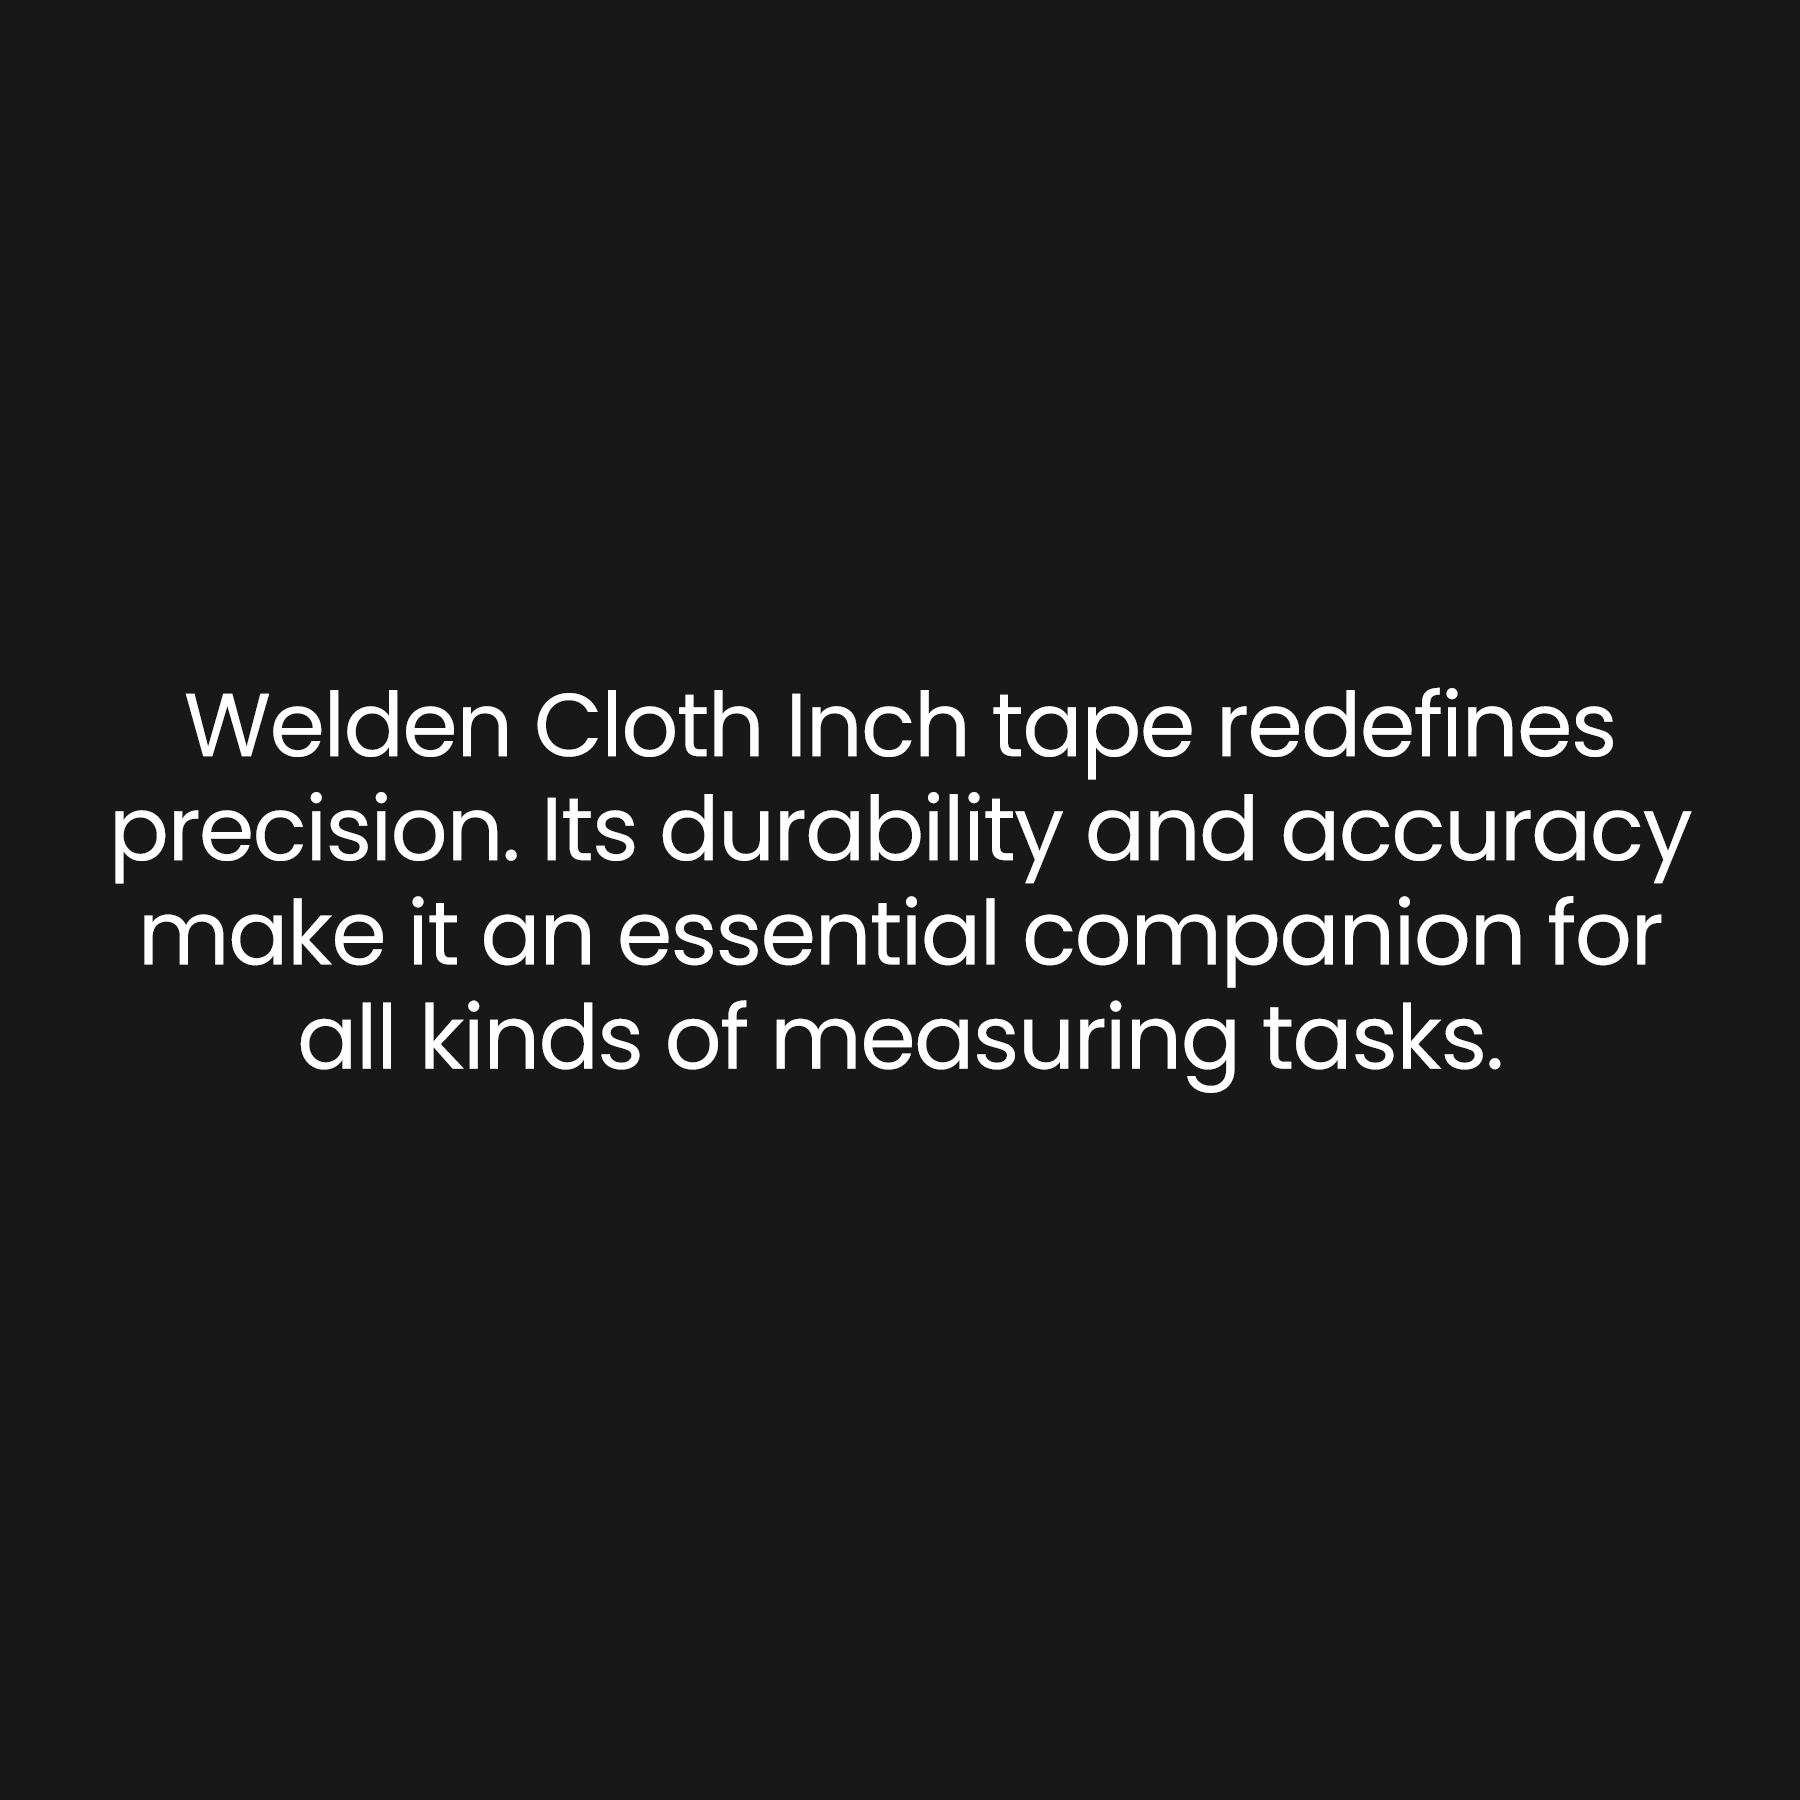 Welden Cloth Inch tape redefines precision. Its durability and accuracy make it an essential companion for all kinds of measuring tasks